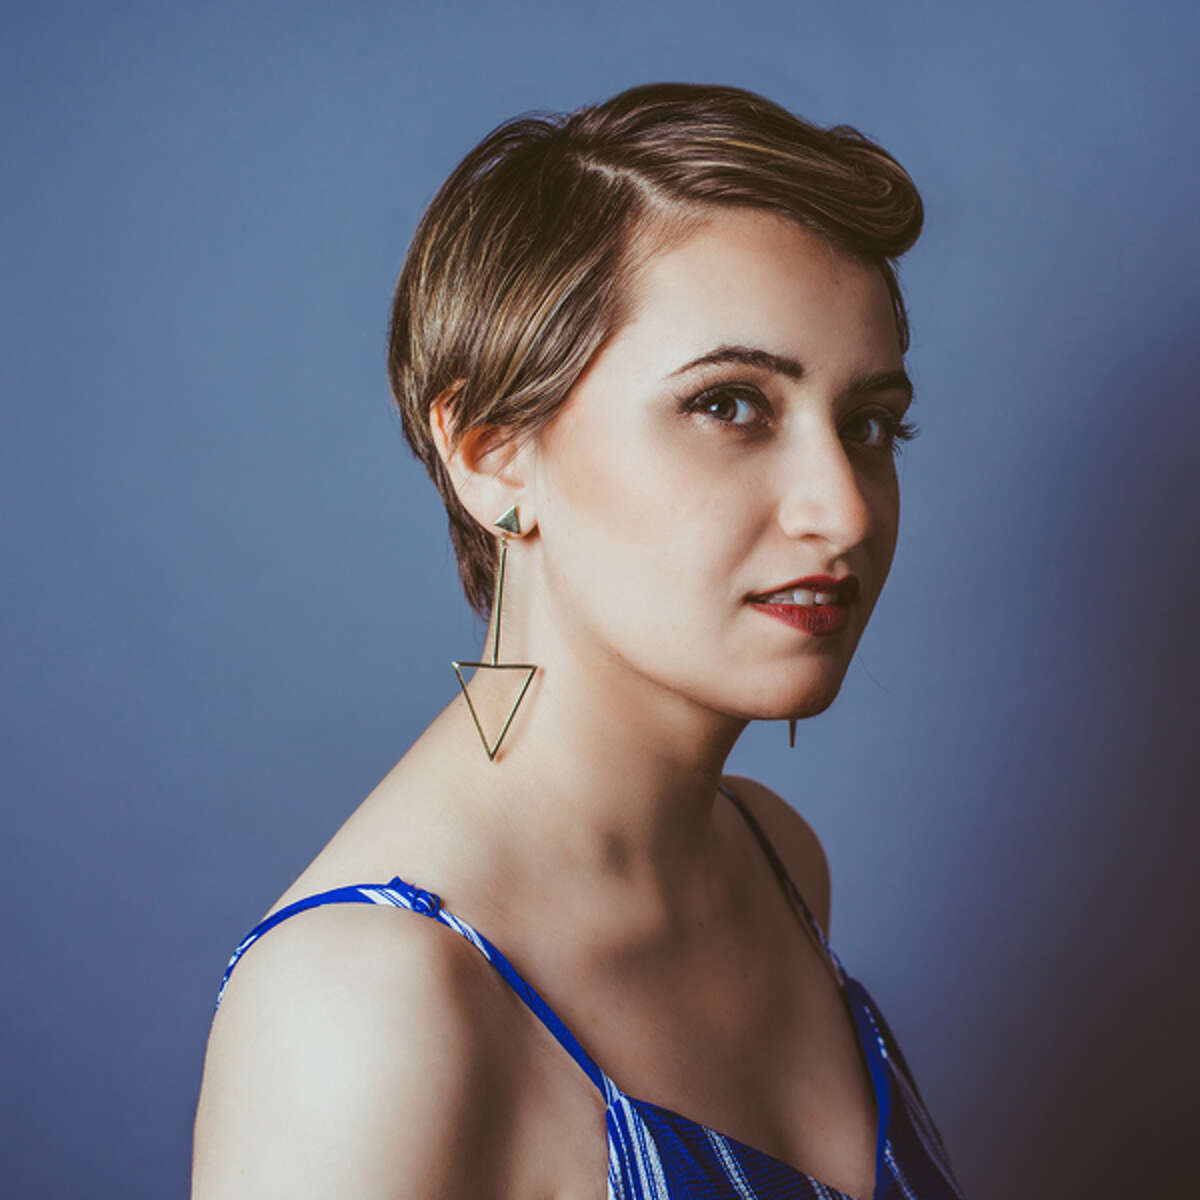 The Palace Theater's spring jazz series kicks off April 14 with Sarah J. Cion, followed by Kristina Koller, pictured, on April 28, the Champian Fulton Trio on May 19, and the Joe Alterman Quartet presented by Litchfield Jazzfest on June 2.